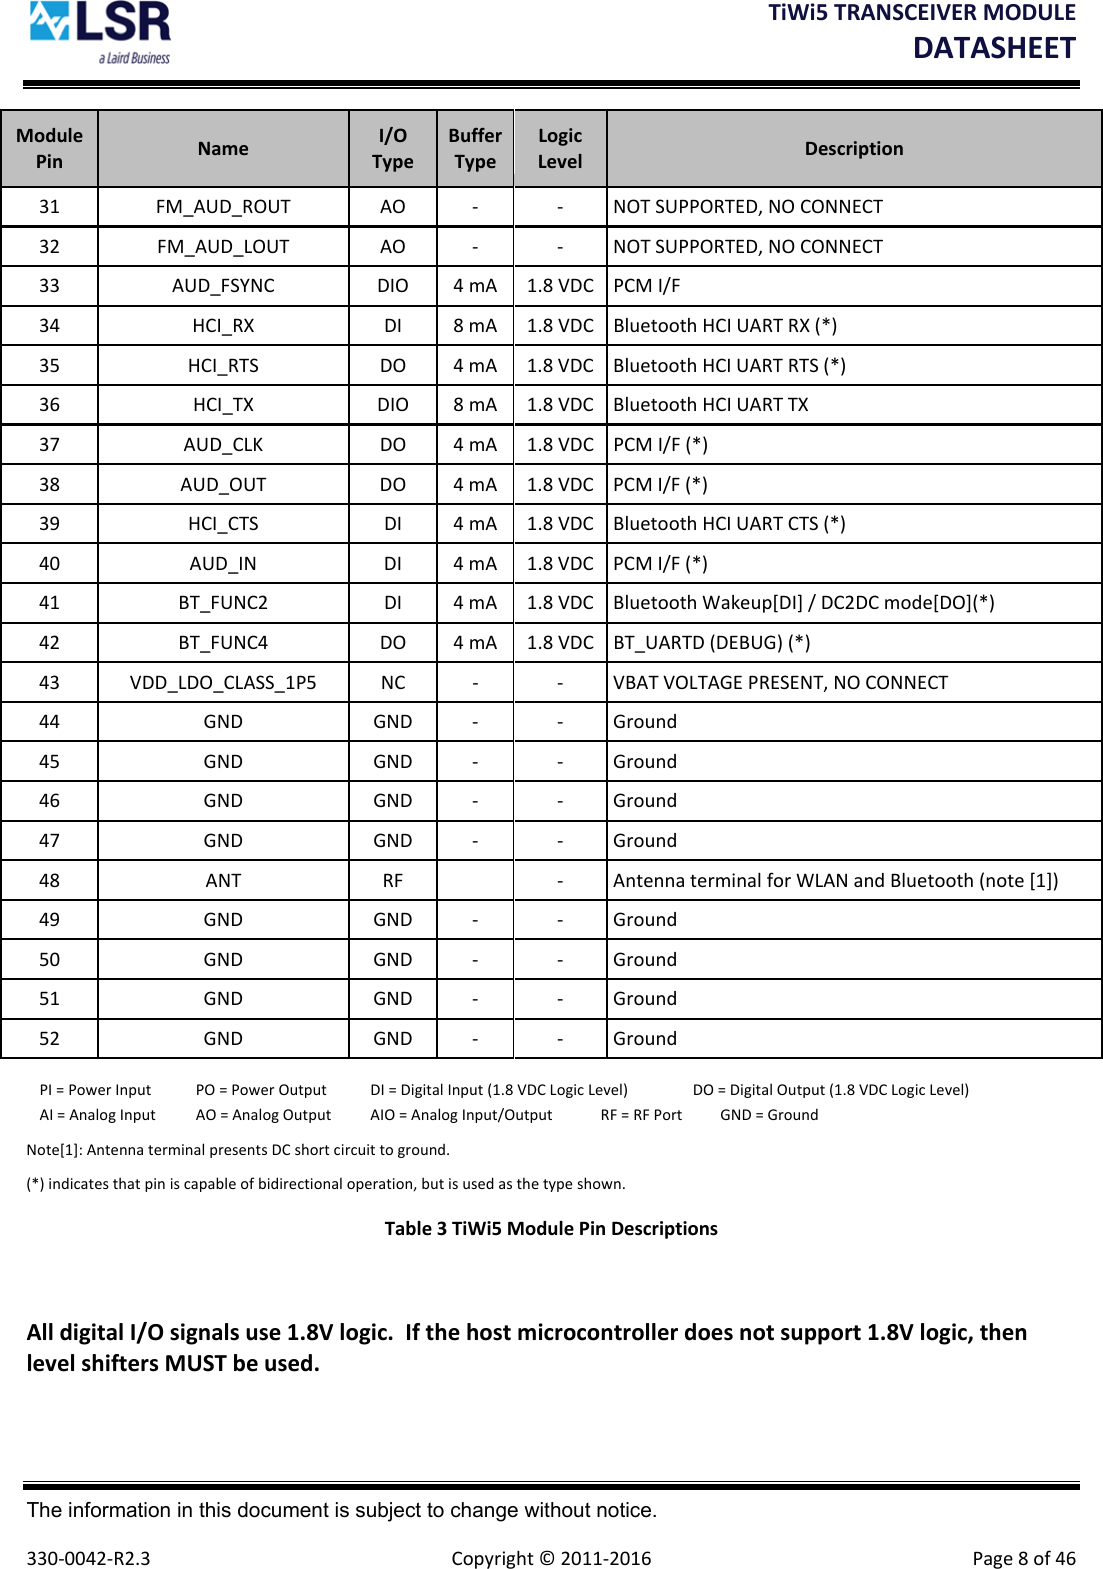 TiWi5TRANSCEIVERMODULEDATASHEET The information in this document is subject to change without notice.  330‐0042‐R2.3  Copyright©2011‐2016 Page8of46ModulePin Name I/OTypeBufferTypeLogicLevel Description31 FM_AUD_ROUT AO ‐ ‐ NOTSUPPORTED,NOCONNECT32 FM_AUD_LOUT AO ‐ ‐ NOTSUPPORTED,NOCONNECT33 AUD_FSYNC DIO 4mA 1.8VDC PCMI/F34 HCI_RX DI 8mA 1.8VDC BluetoothHCI UARTRX(*)35 HCI_RTS DO 4mA 1.8VDC BluetoothHCI UARTRTS(*)36 HCI_TX DIO 8mA 1.8VDC BluetoothHCI UART TX37 AUD_CLK DO 4mA 1.8VDC PCMI/F (*)38 AUD_OUT DO 4mA 1.8VDC PCMI/F(*)39 HCI_CTS DI 4mA 1.8VDC BluetoothHCI UARTCTS(*)40 AUD_IN DI 4mA 1.8VDC PCMI/F (*)41 BT_FUNC2 DI 4mA 1.8VDC BluetoothWakeup[DI] /DC2DCmode[DO](*)42 BT_FUNC4 DO 4mA 1.8VDC BT_UARTD(DEBUG)(*)43 VDD_LDO_CLASS_1P5 NC ‐ ‐ VBATVOLTAGEPRESENT,NOCONNECT44 GND GND ‐ ‐ Ground45 GND GND ‐ ‐ Ground46 GND GND ‐ ‐ Ground47 GND GND ‐ ‐ Ground48 ANT RF ‐ AntennaterminalforWLANandBluetooth(note[1])49 GND GND ‐ ‐ Ground50 GND GND ‐ ‐ Ground51 GND GND ‐ ‐ Ground52 GND GND ‐ ‐ GroundPI=PowerInput PO=PowerOutput DI=DigitalInput(1.8VDCLogicLevel) DO=DigitalOutput(1.8VDCLogicLevel) AI=AnalogInput AO=AnalogOutput AIO=AnalogInput/Output RF=RFPort GND=Ground Note[1]:AntennaterminalpresentsDCshortcircuittoground.(*)indicatesthatpiniscapableofbidirectionaloperation,butisusedasthetypeshown.Table3TiWi5ModulePinDescriptionsAlldigitalI/Osignalsuse1.8Vlogic.Ifthehostmicrocontrollerdoesnotsupport1.8Vlogic,thenlevelshiftersMUSTbeused.